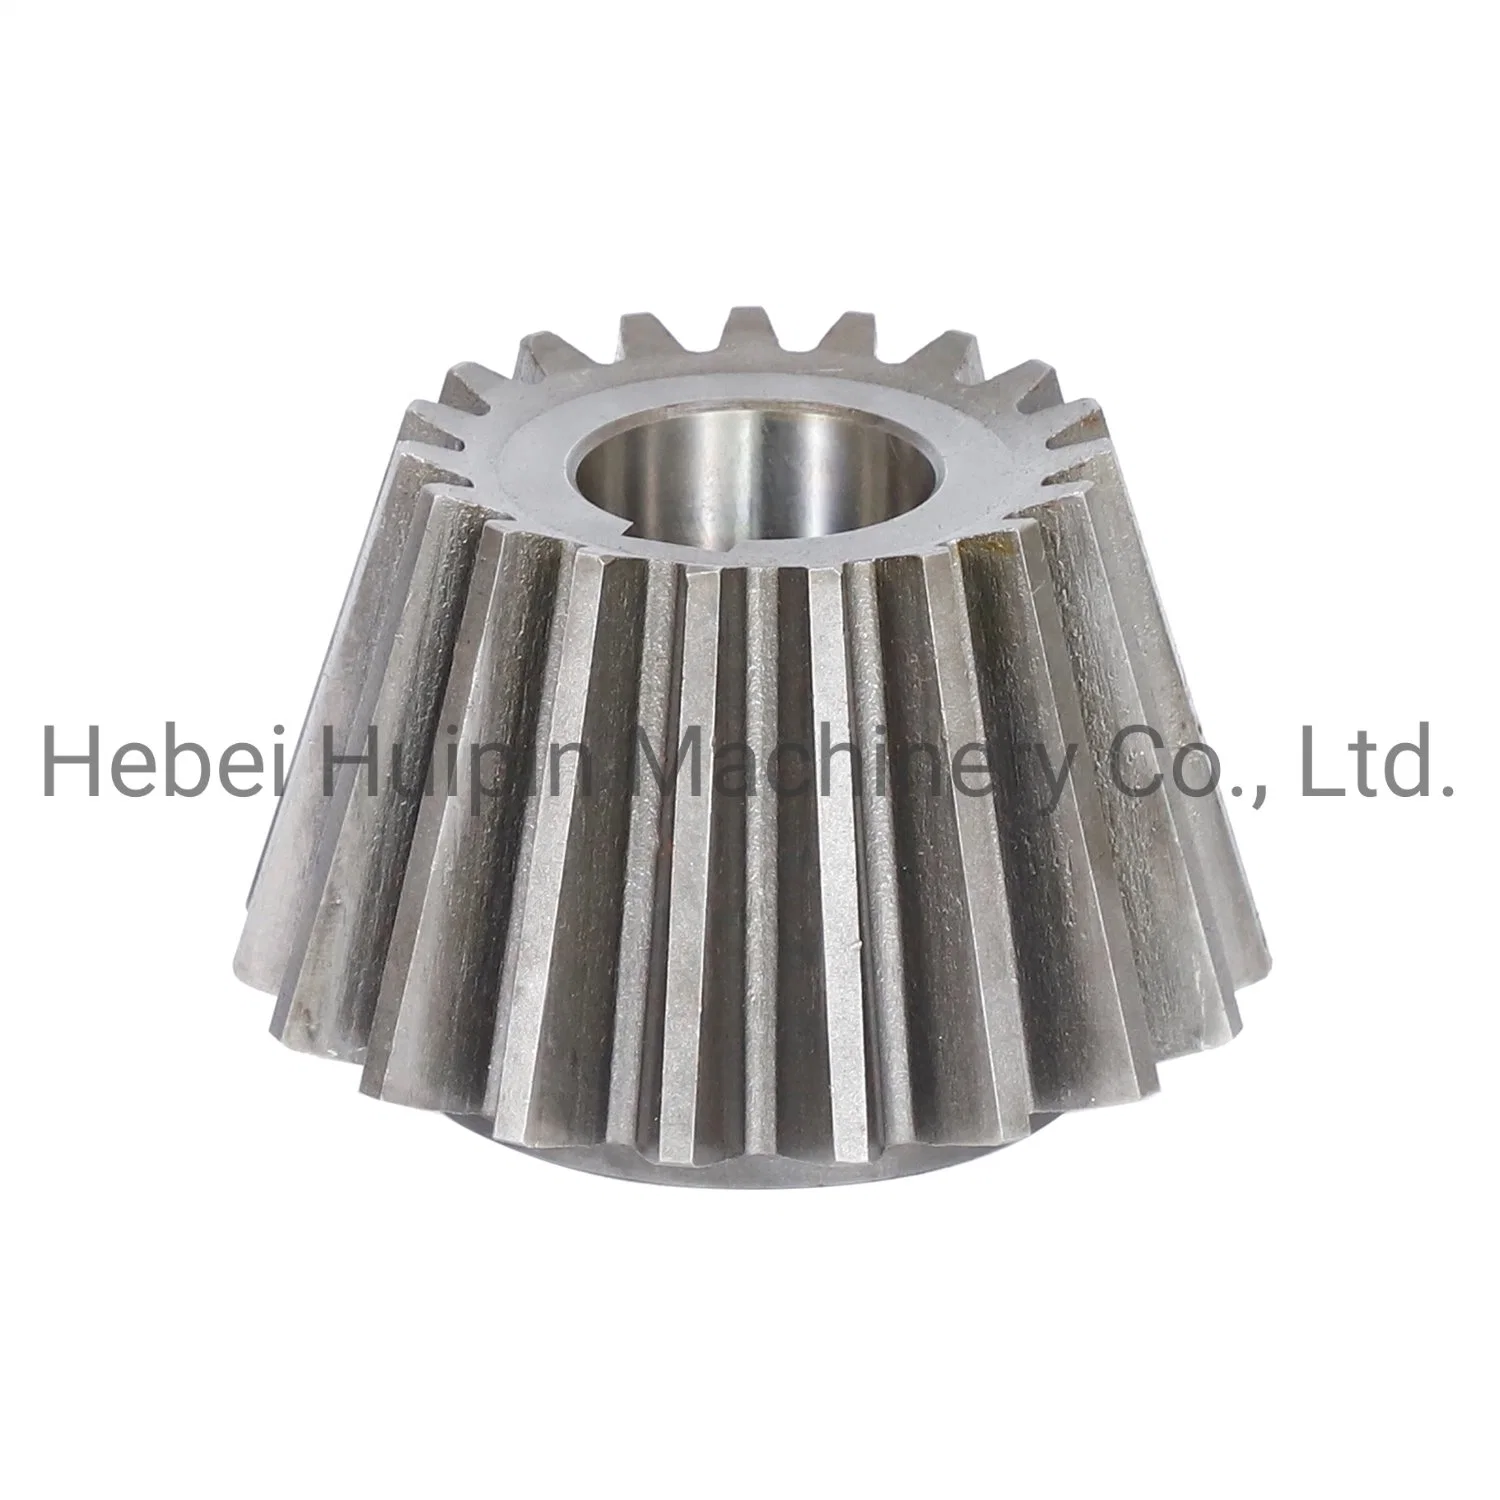 Pressing Warm Shaft Gearbox Spare Parts for Cooking Oil Machine